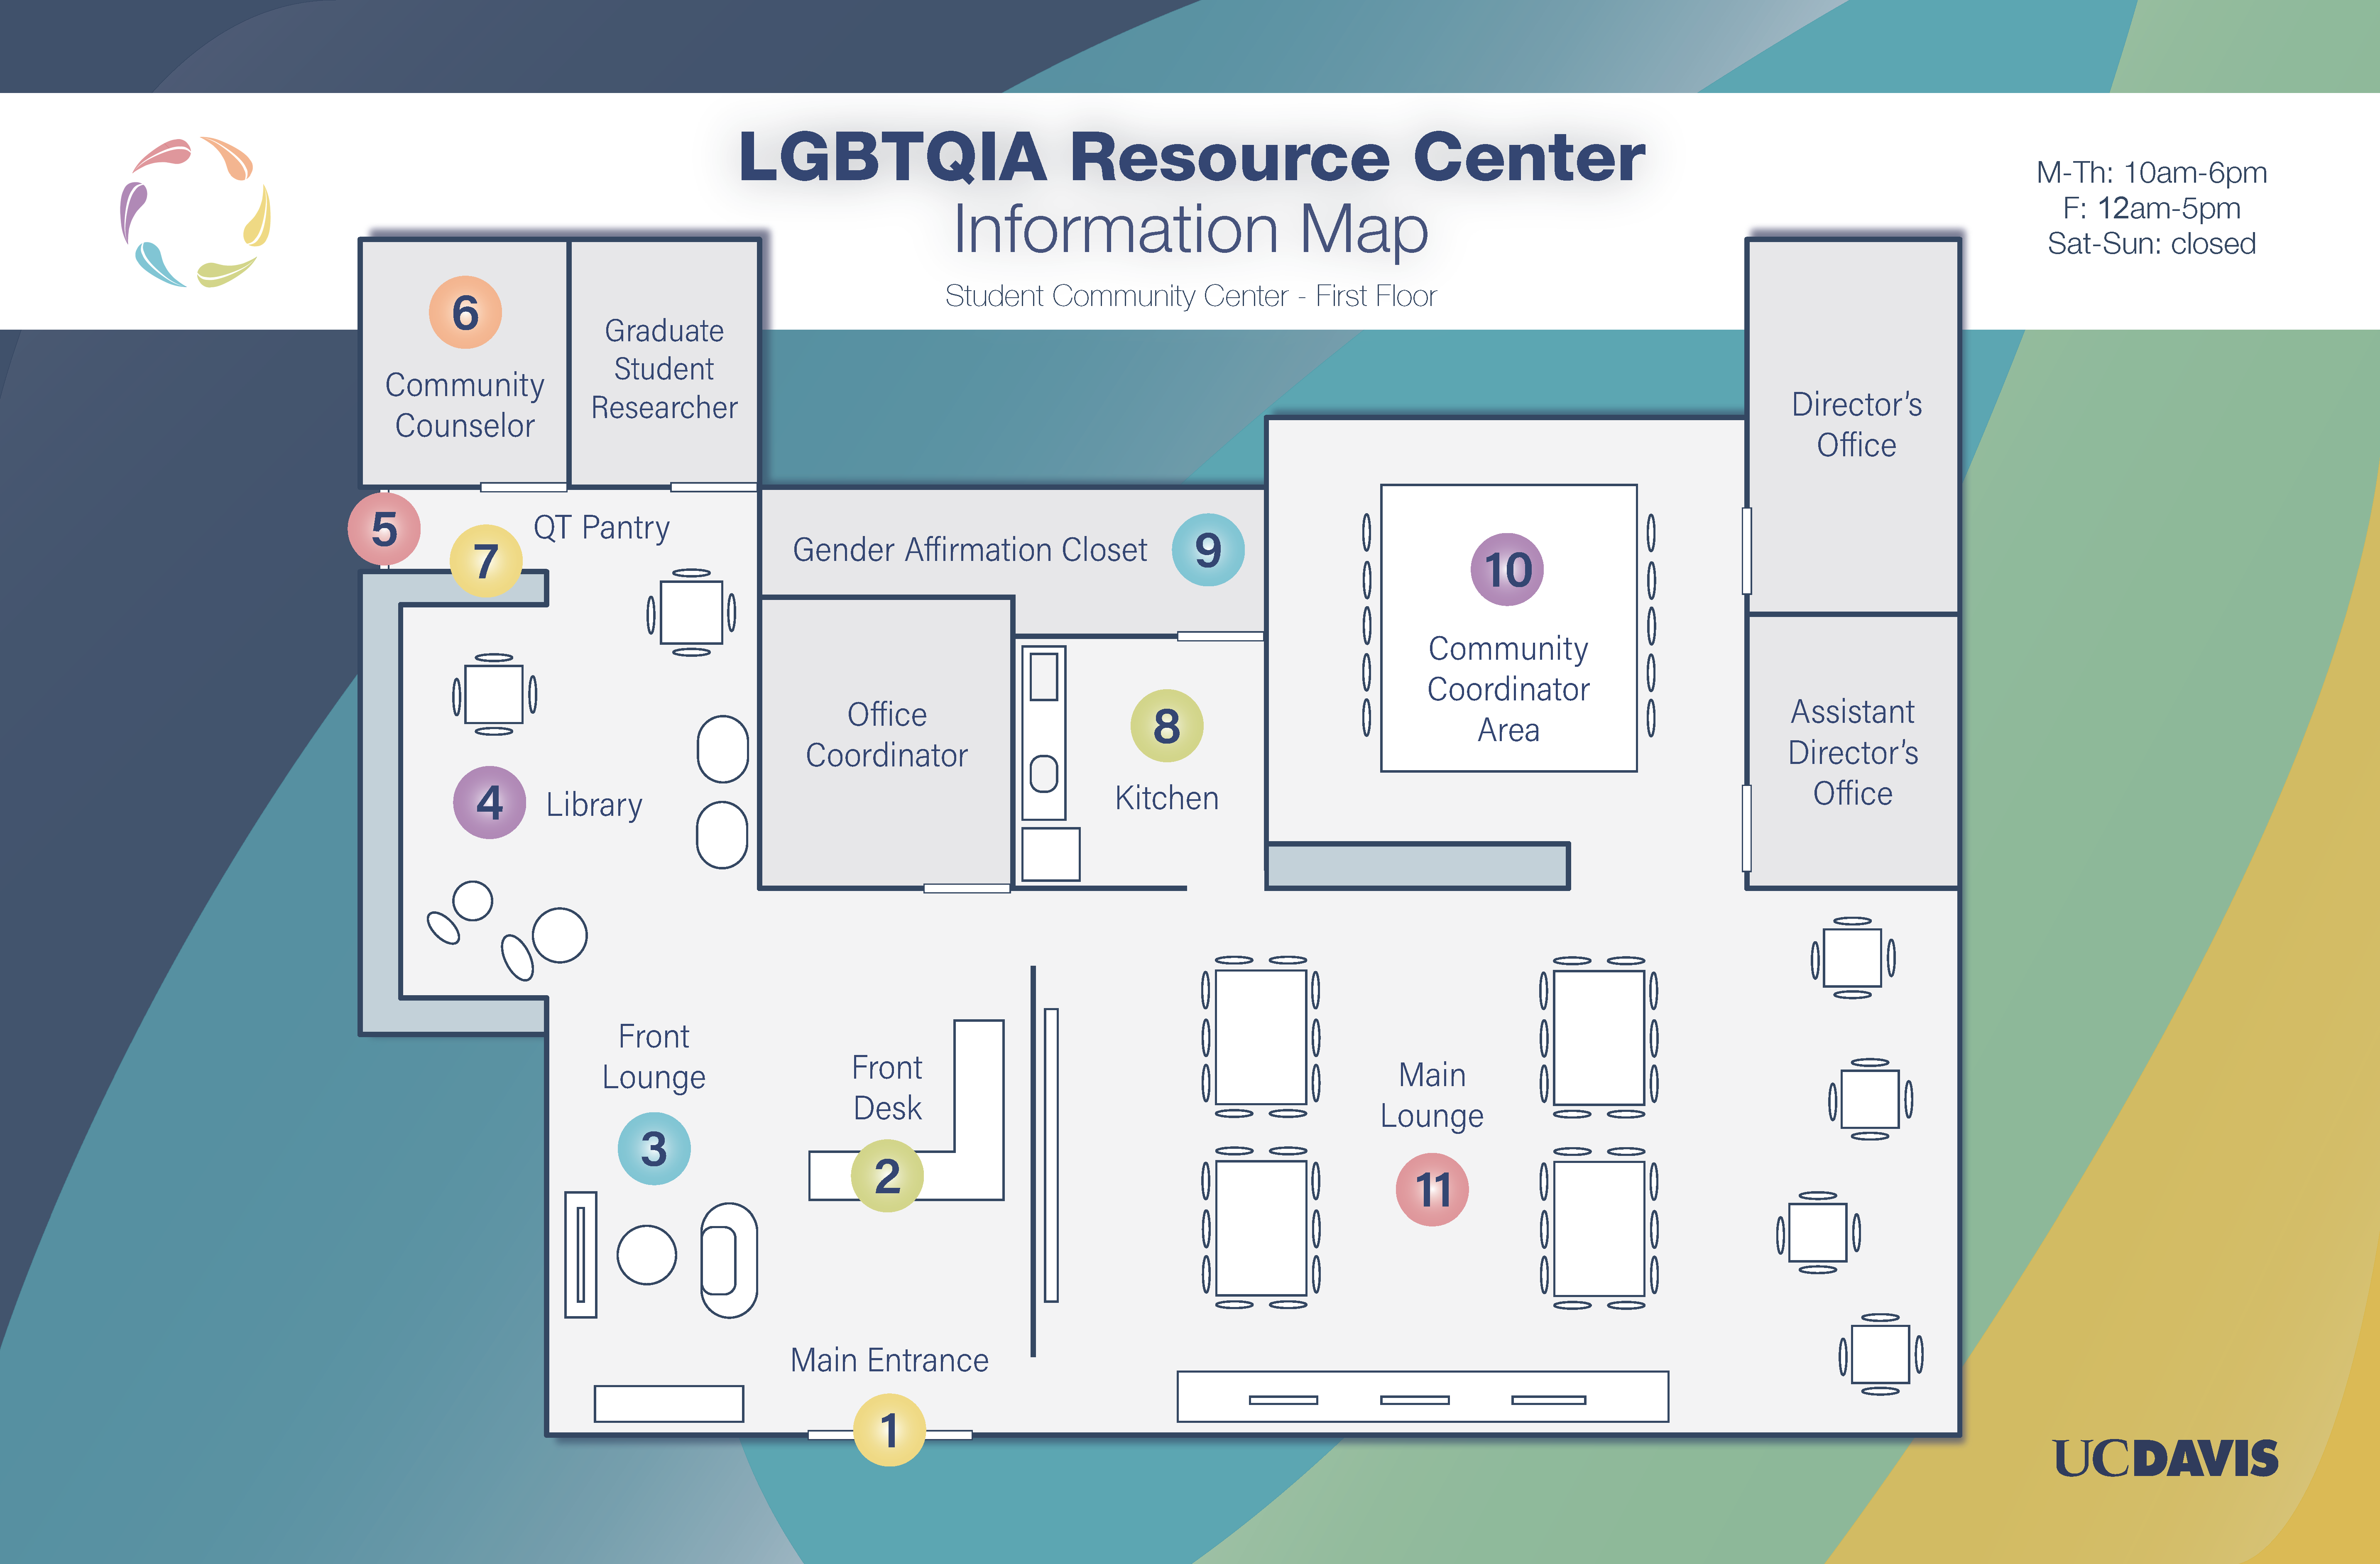 Map of the LGBTQIA Resource Center